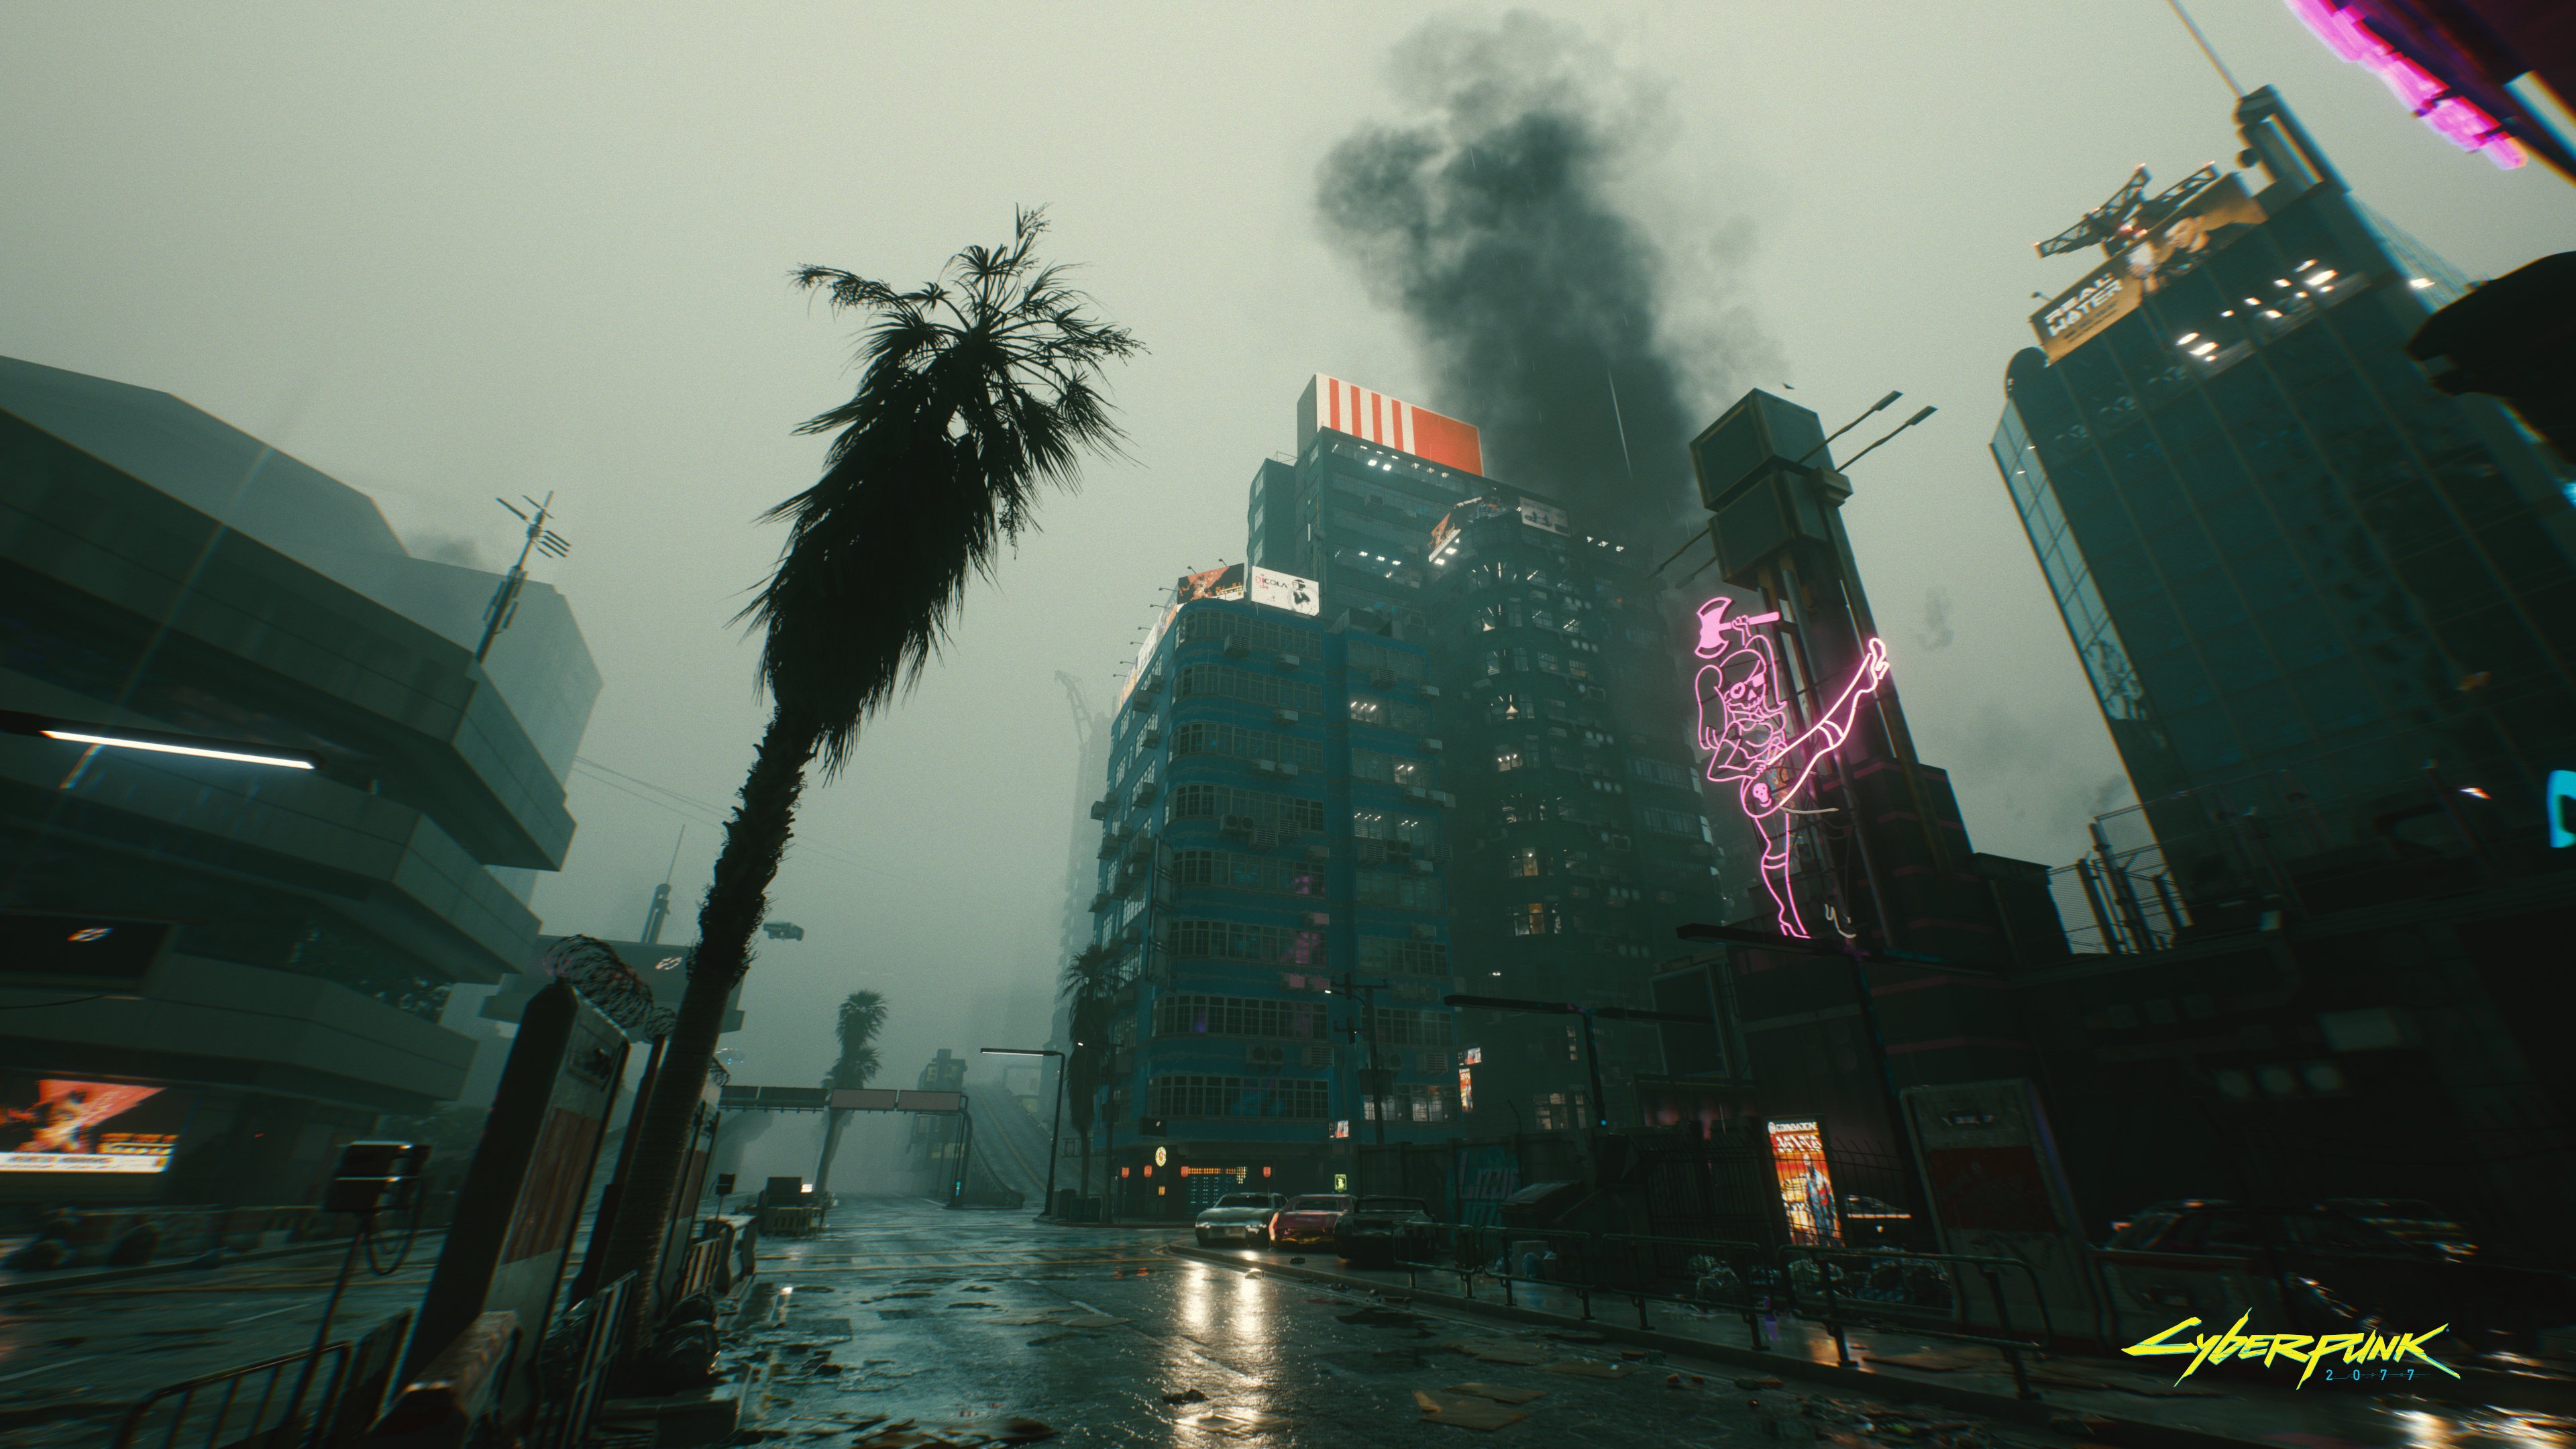 Cyberpunk 2077 - Sci fi city from the upcoming computer game